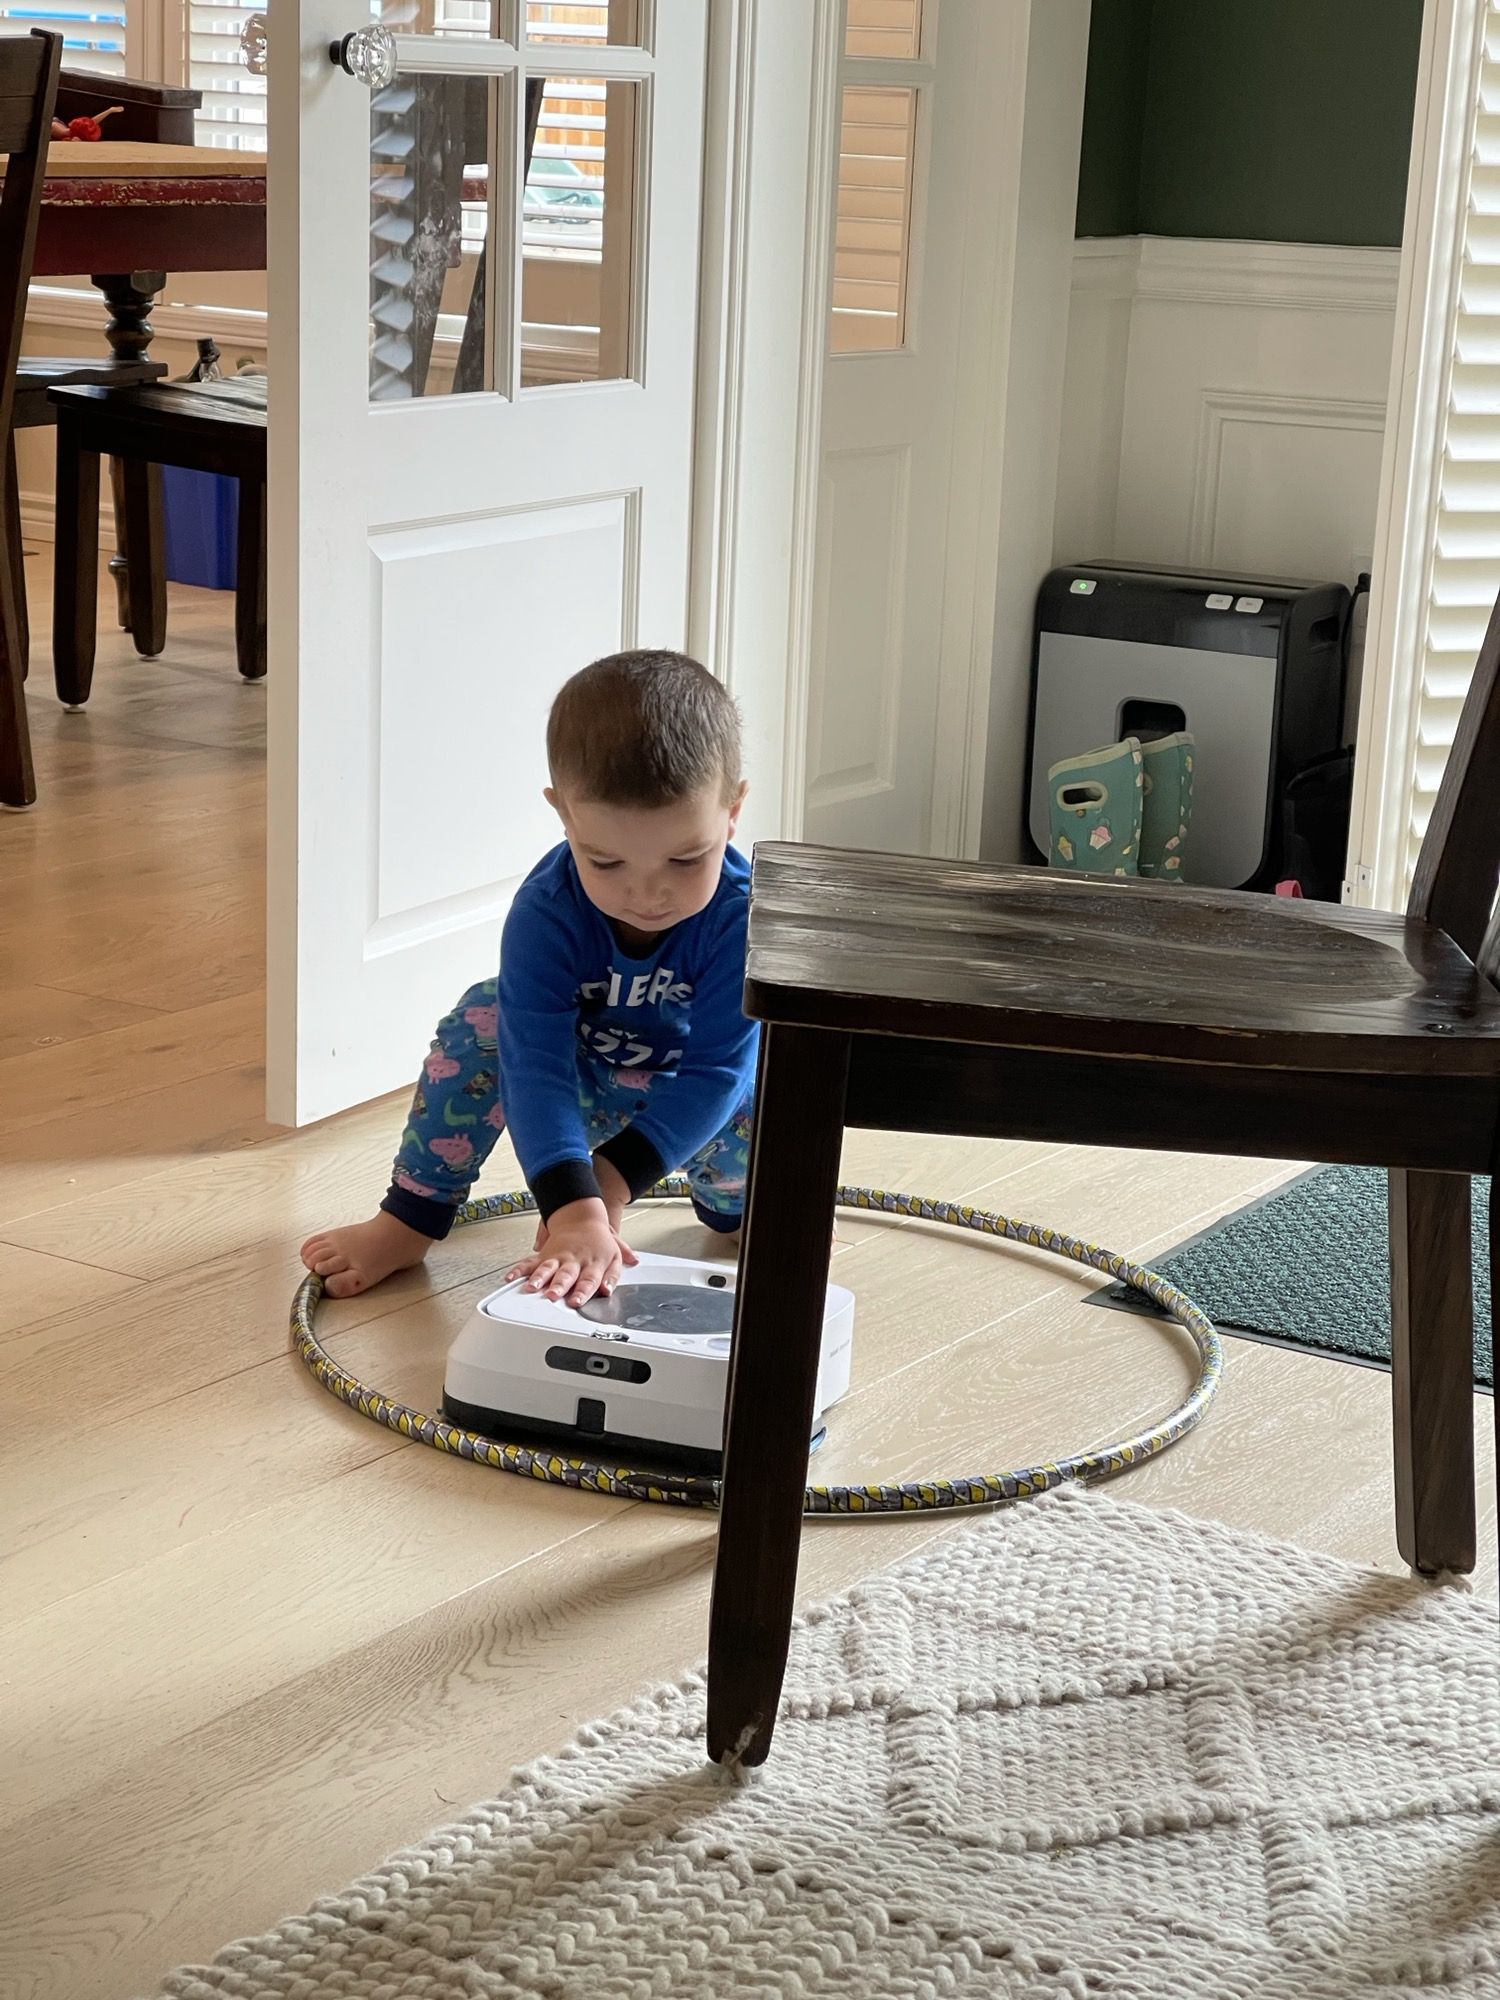 My kid torturing our robot mop is how the robot revolution starts.